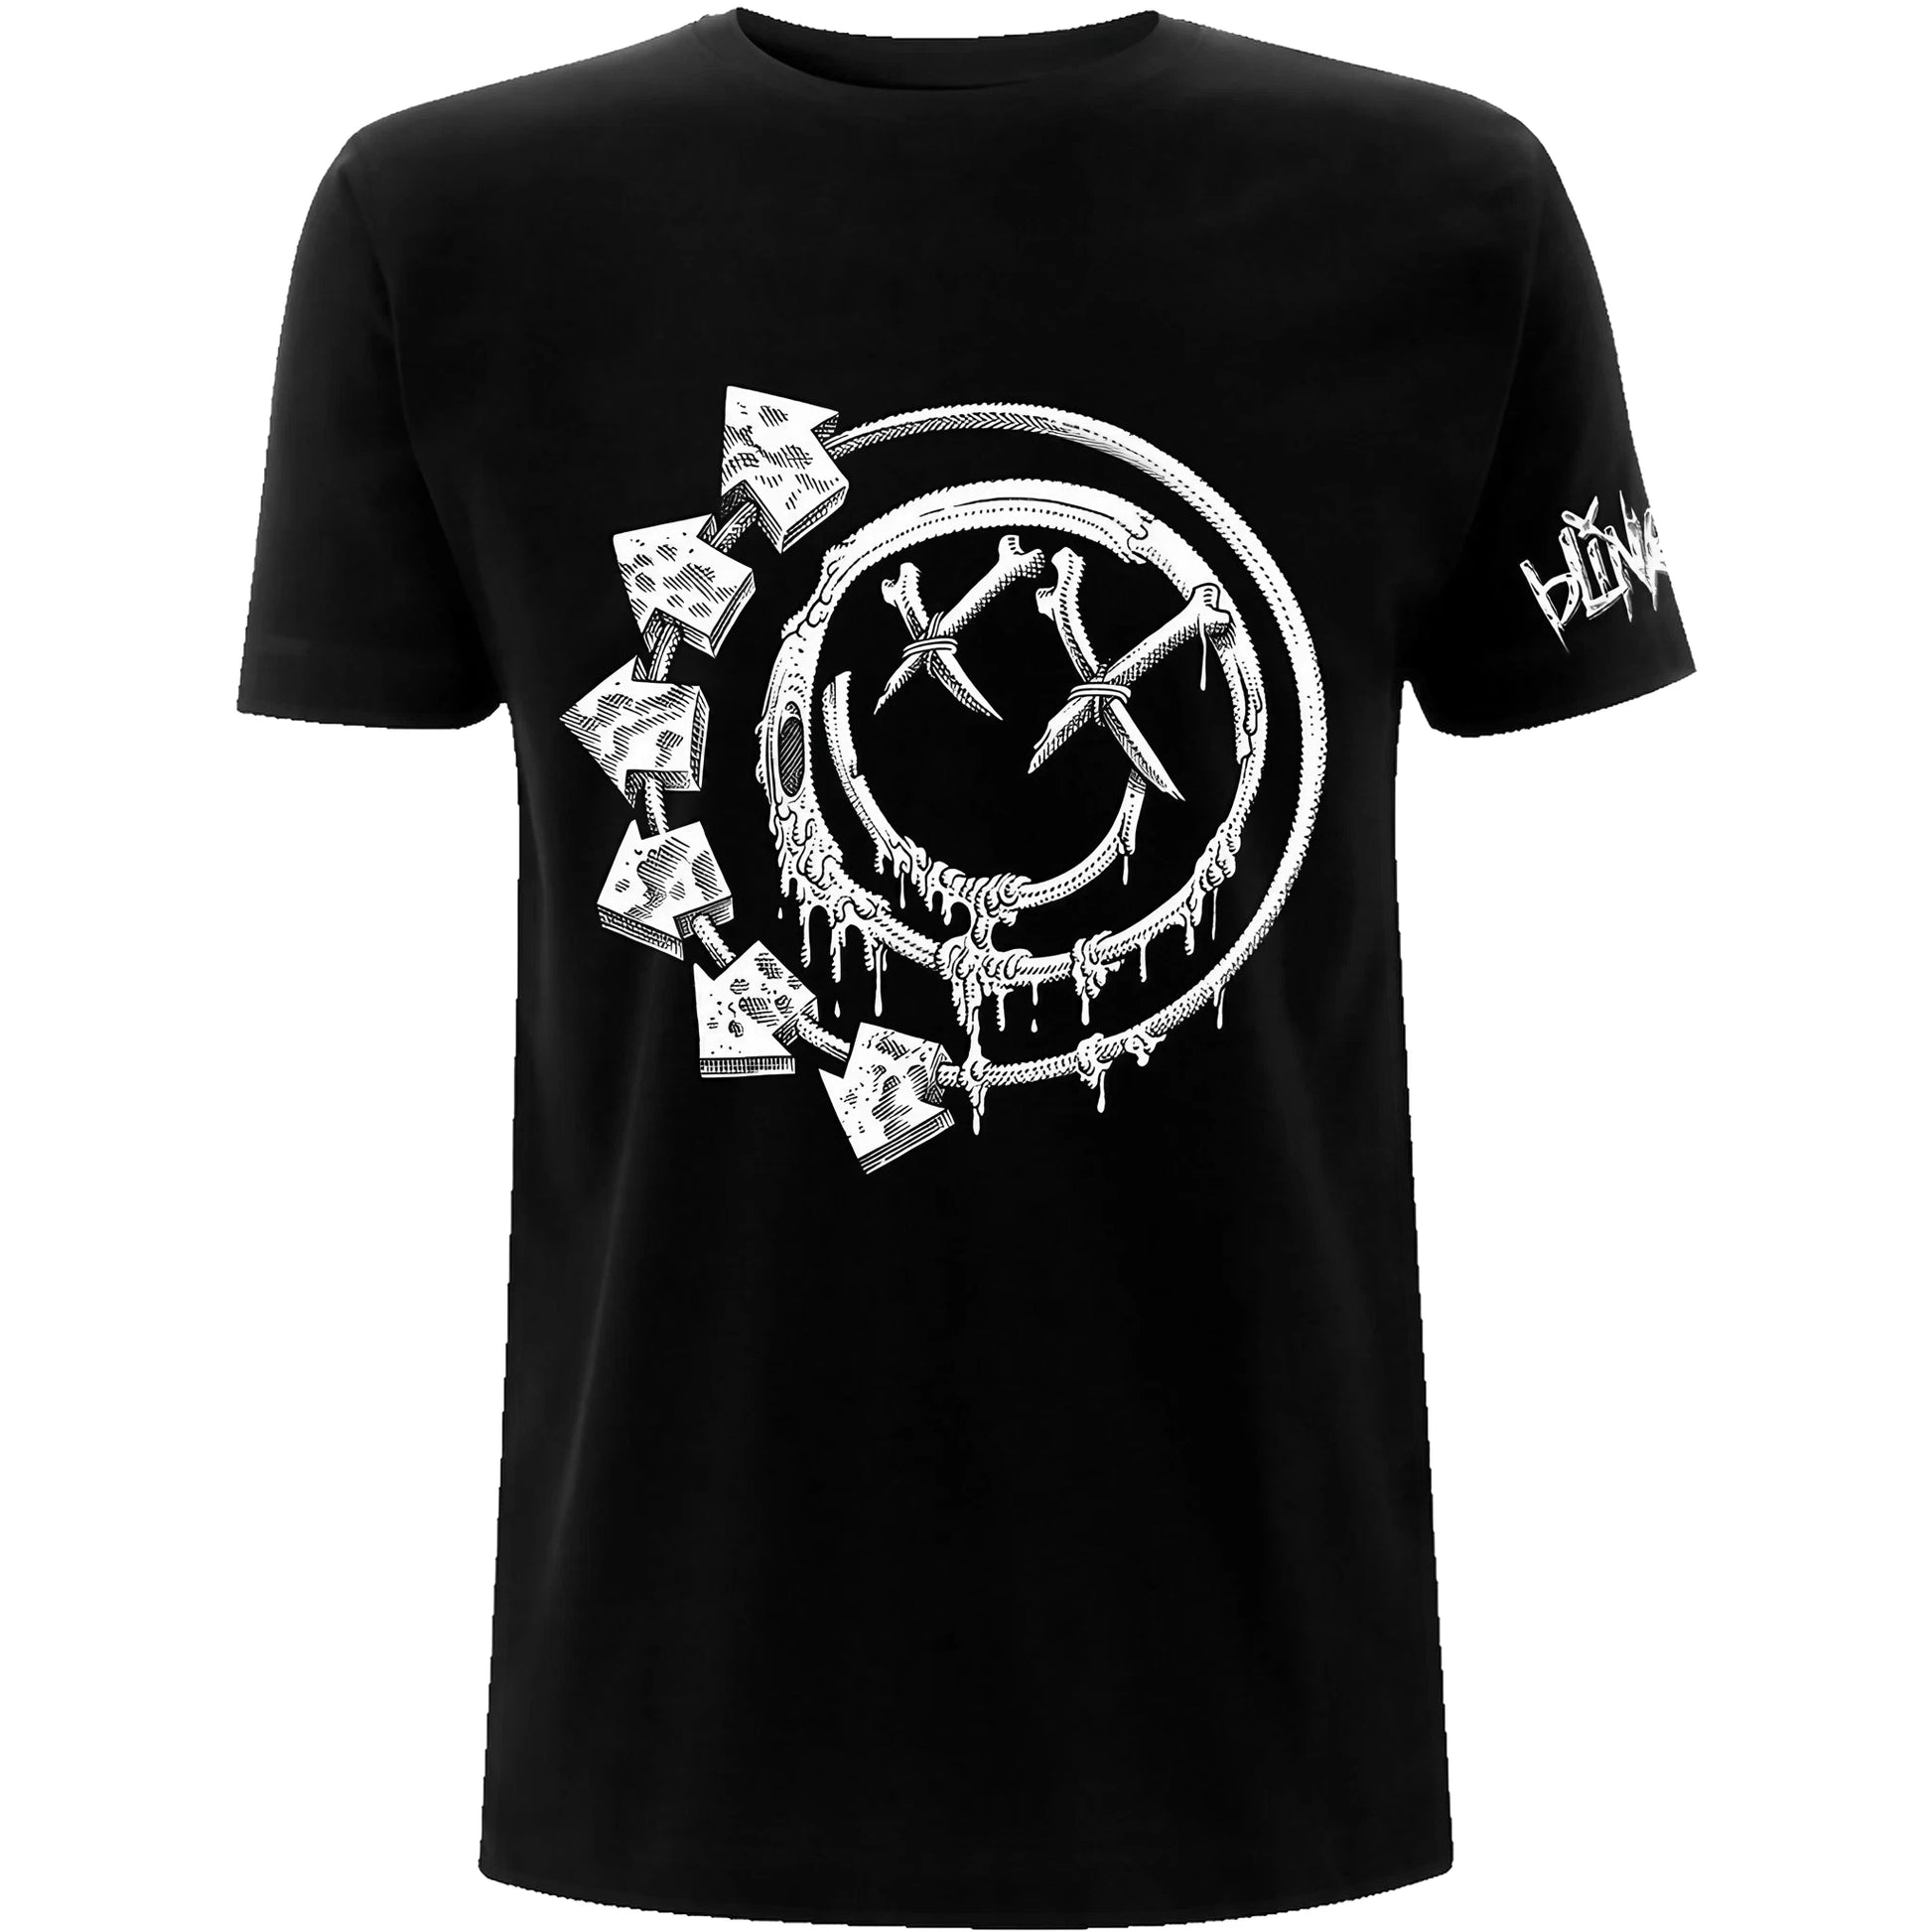 BLINK 182 Bones T-Shirt featuring band's iconic logo on a black background